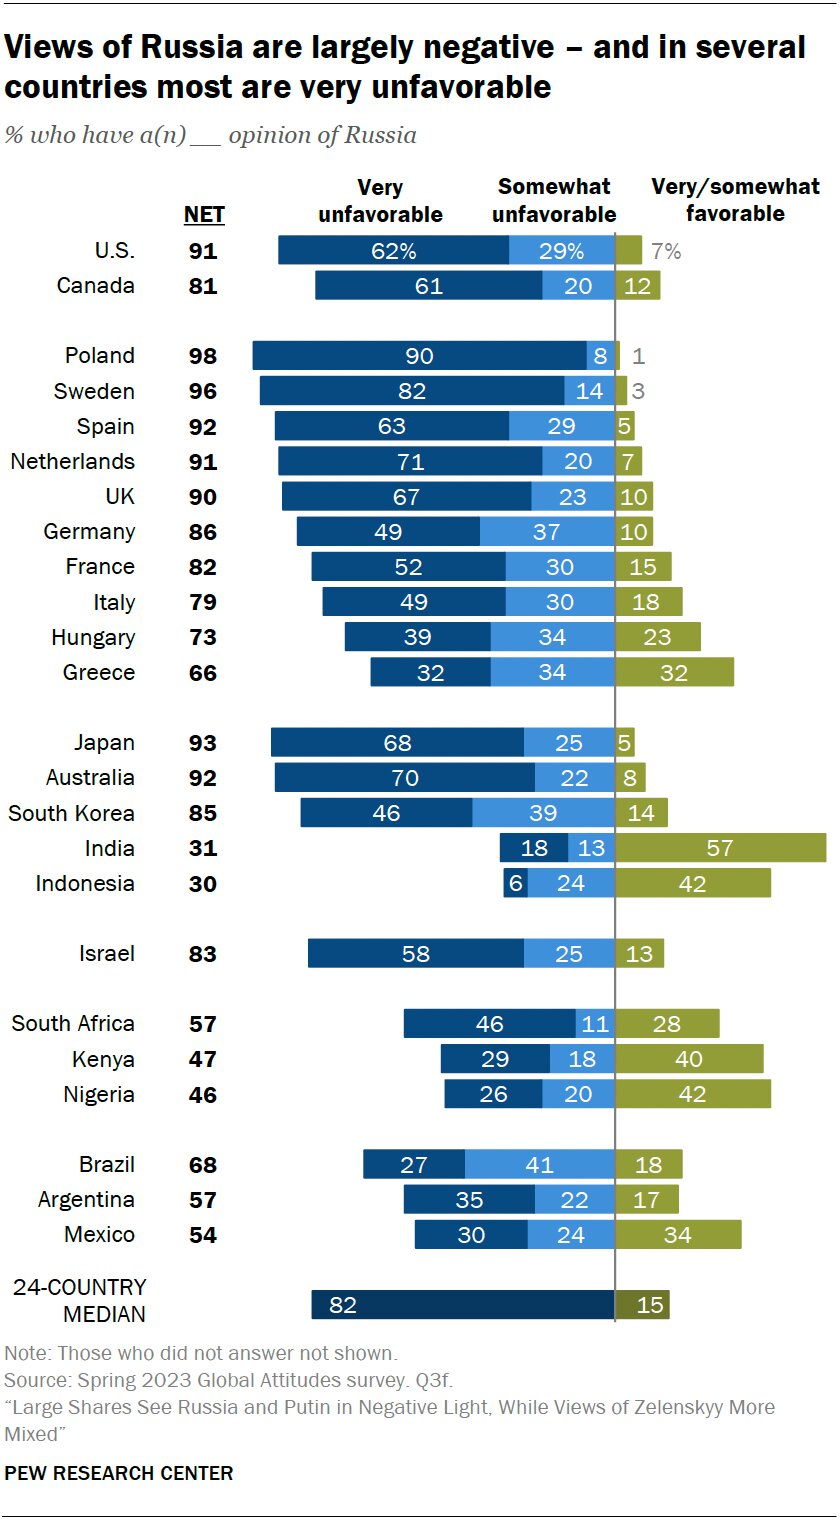 Фото: Pew Research Center